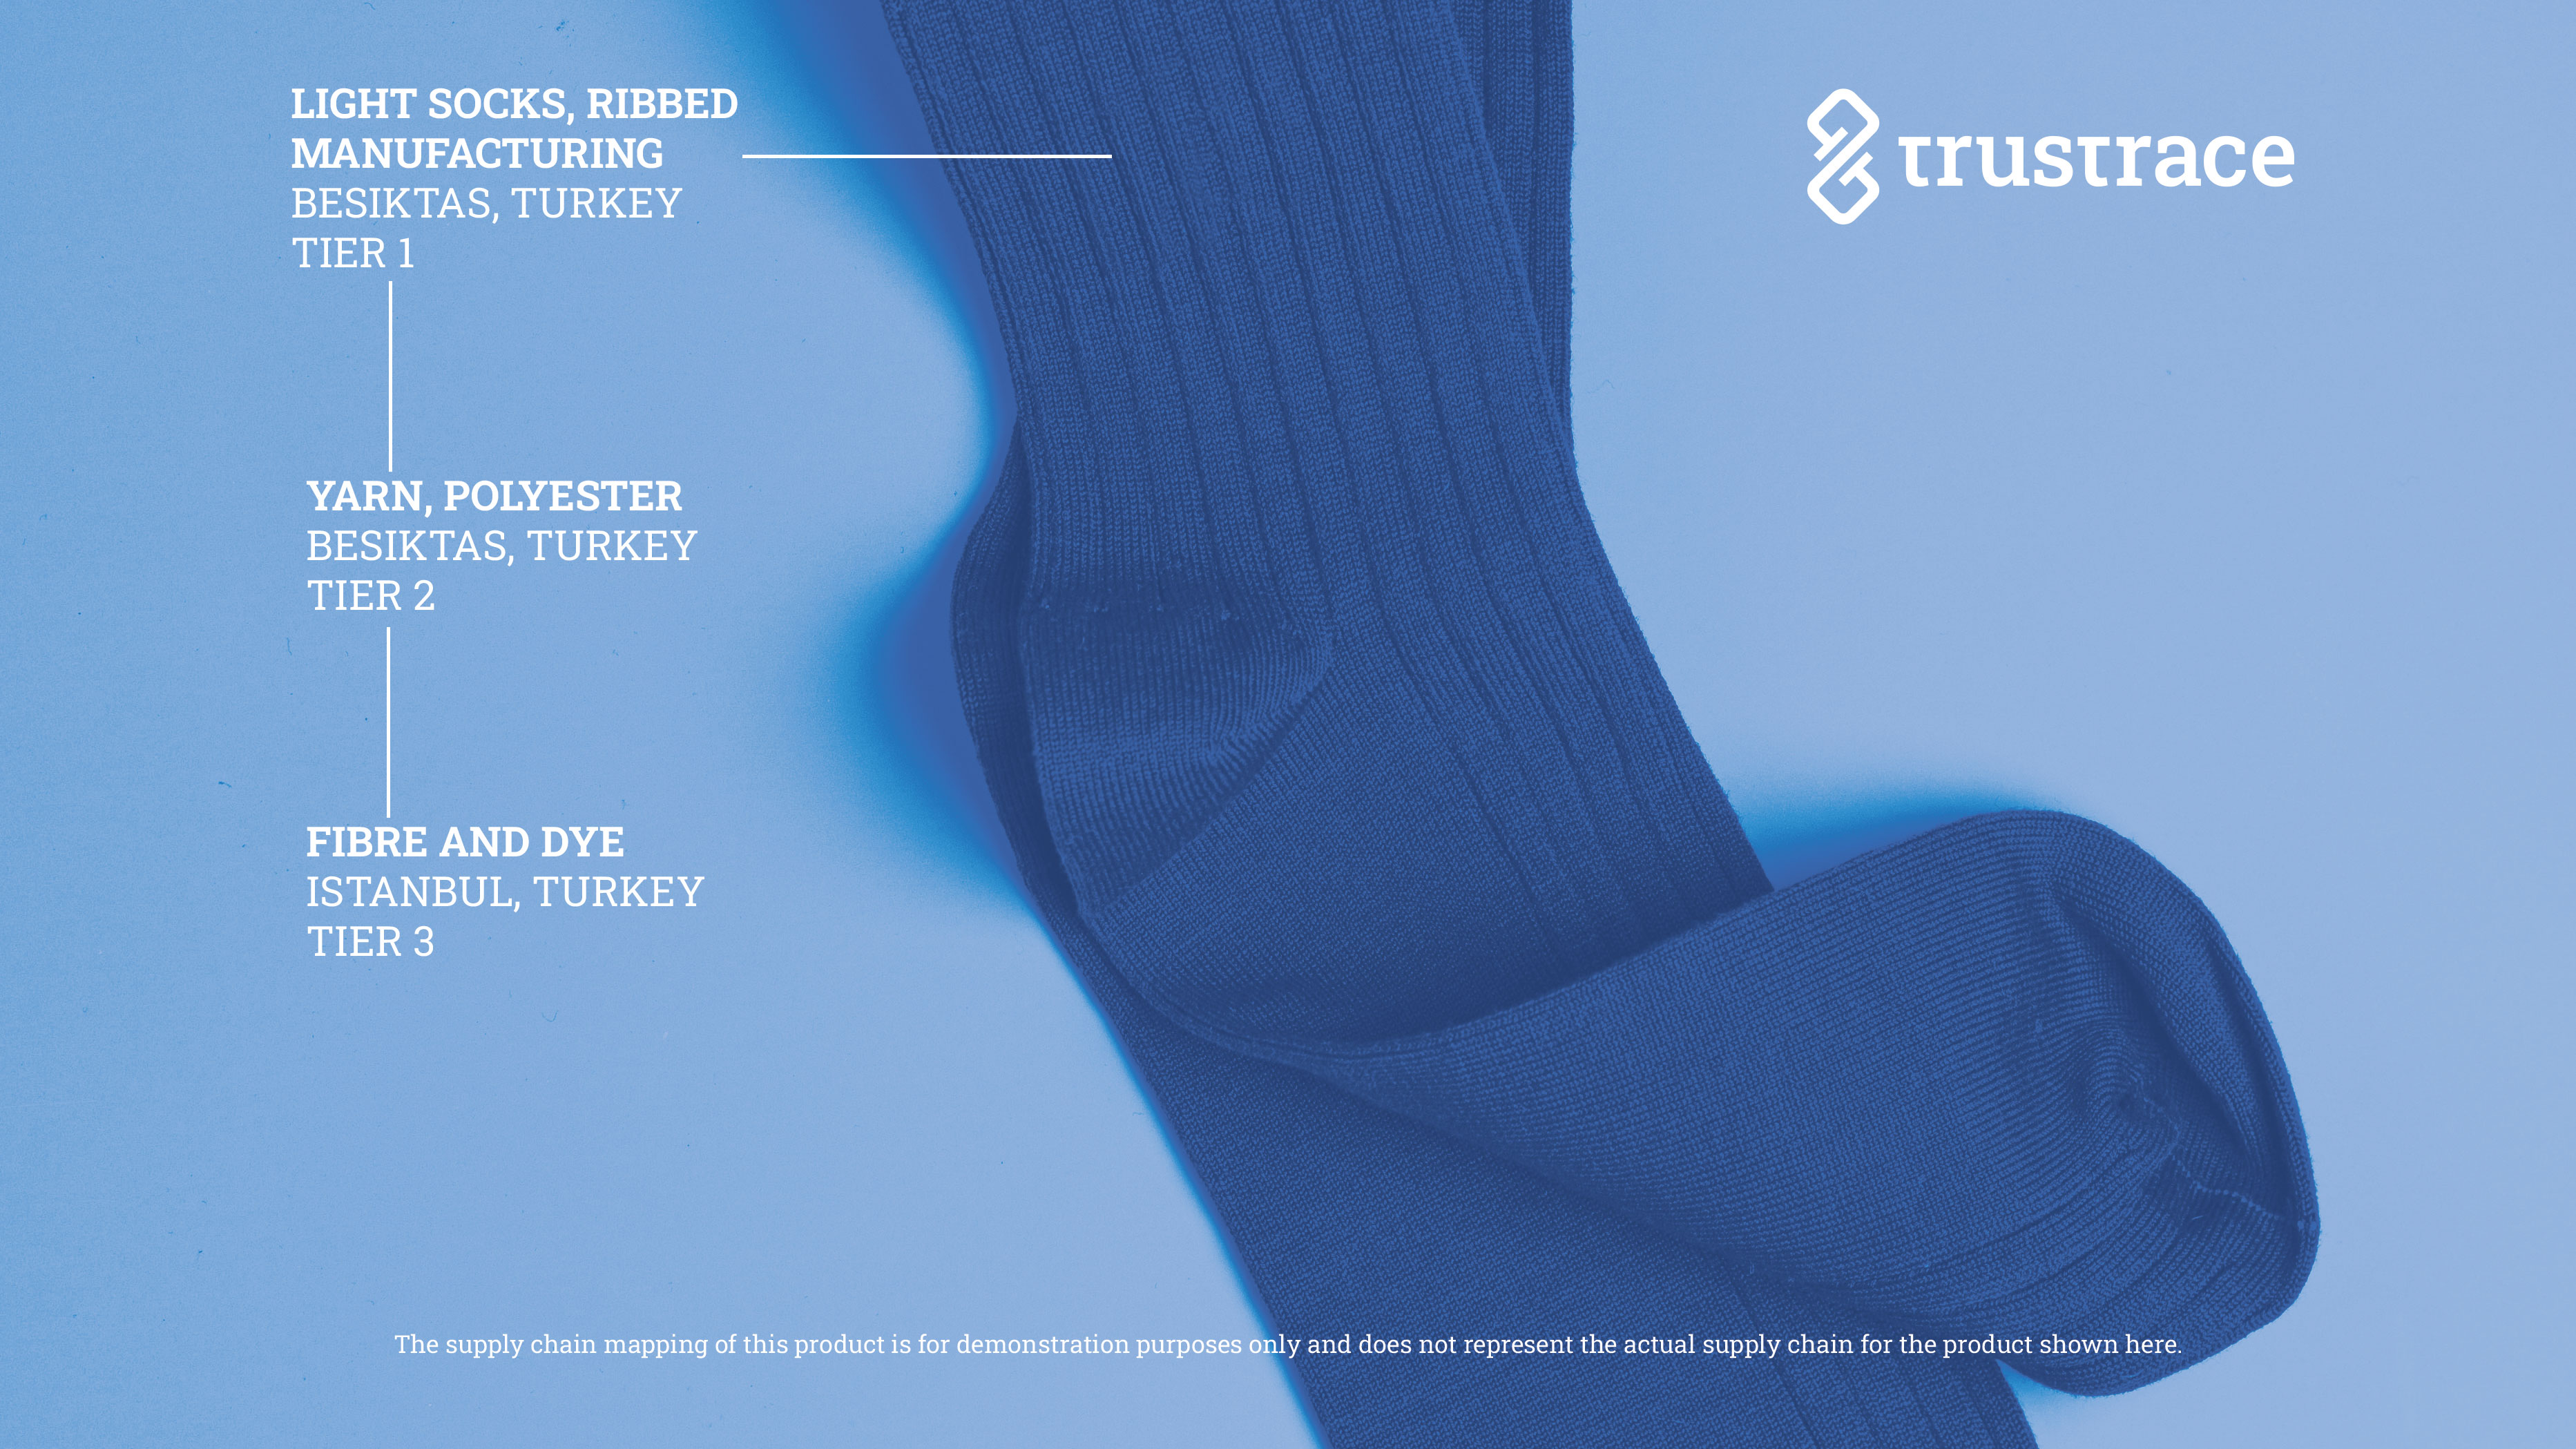 TrusTrace Image of dark blue socks on a blue background with supply chain mapped out